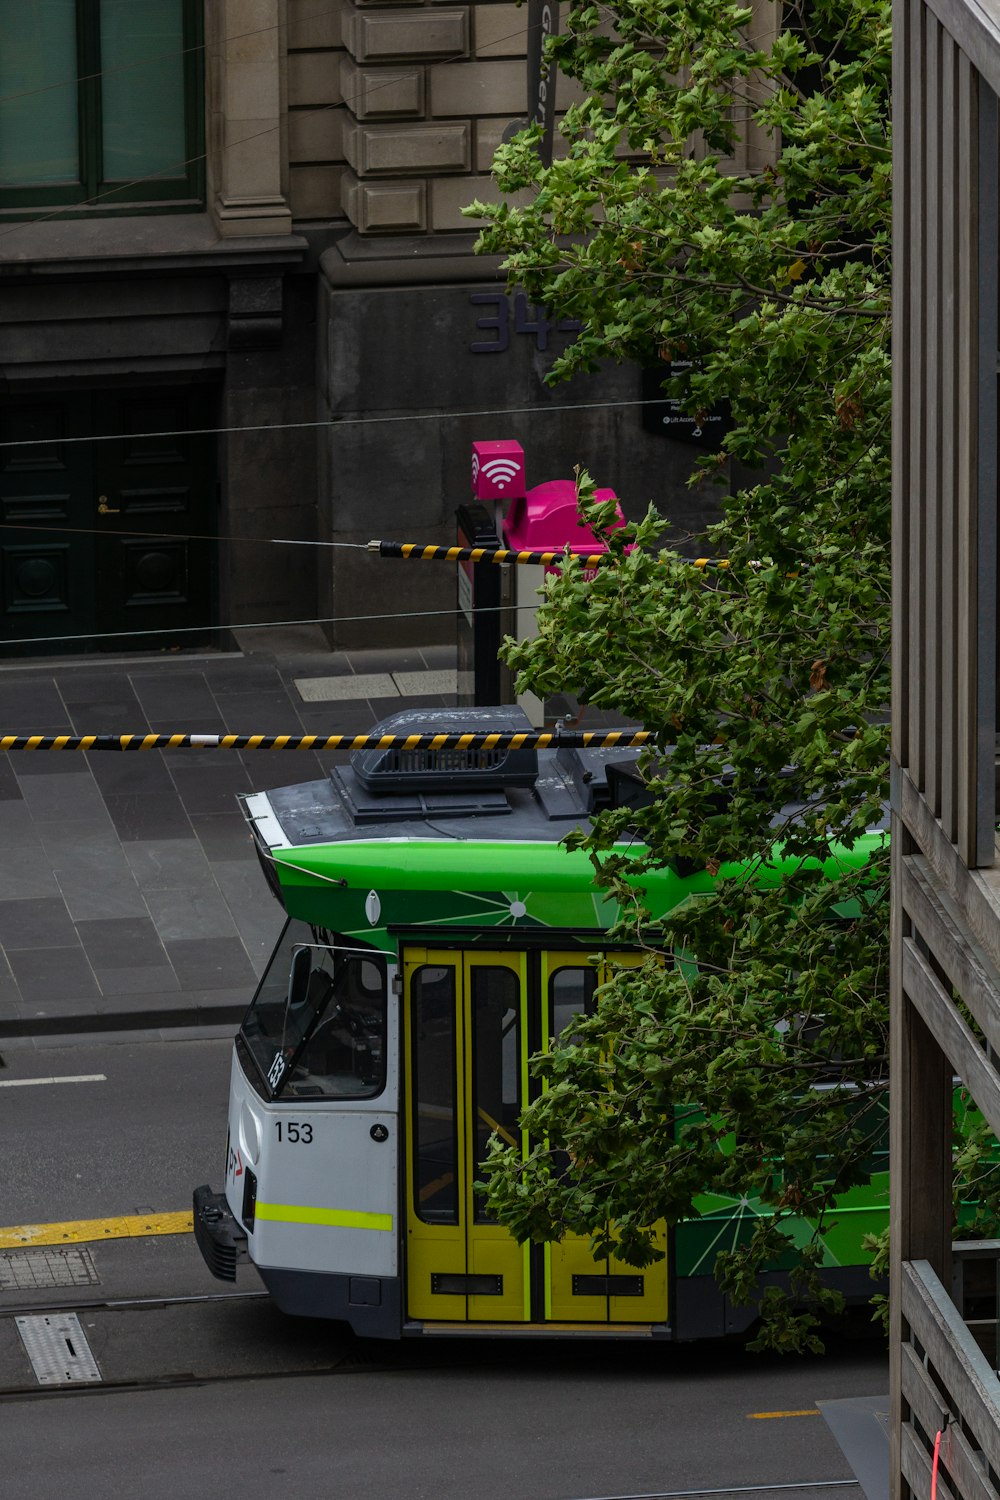 a green and yellow bus driving down a street